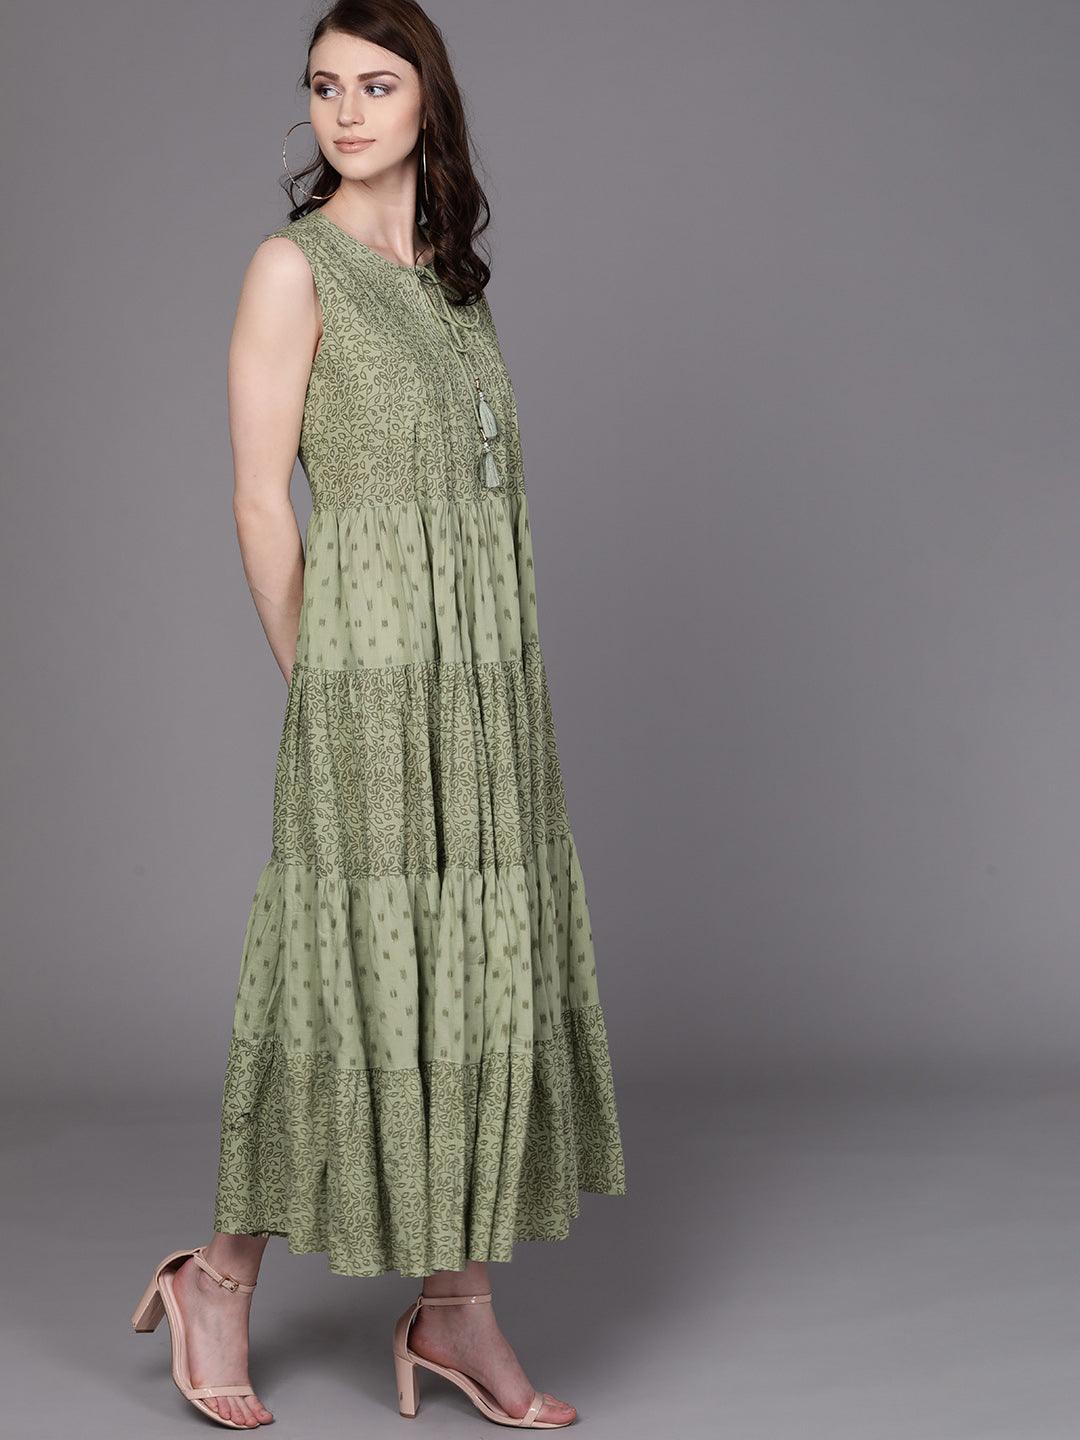 Olive Green Printed Tiered Maxi Dress (Fully Stitched) - Znxclothing